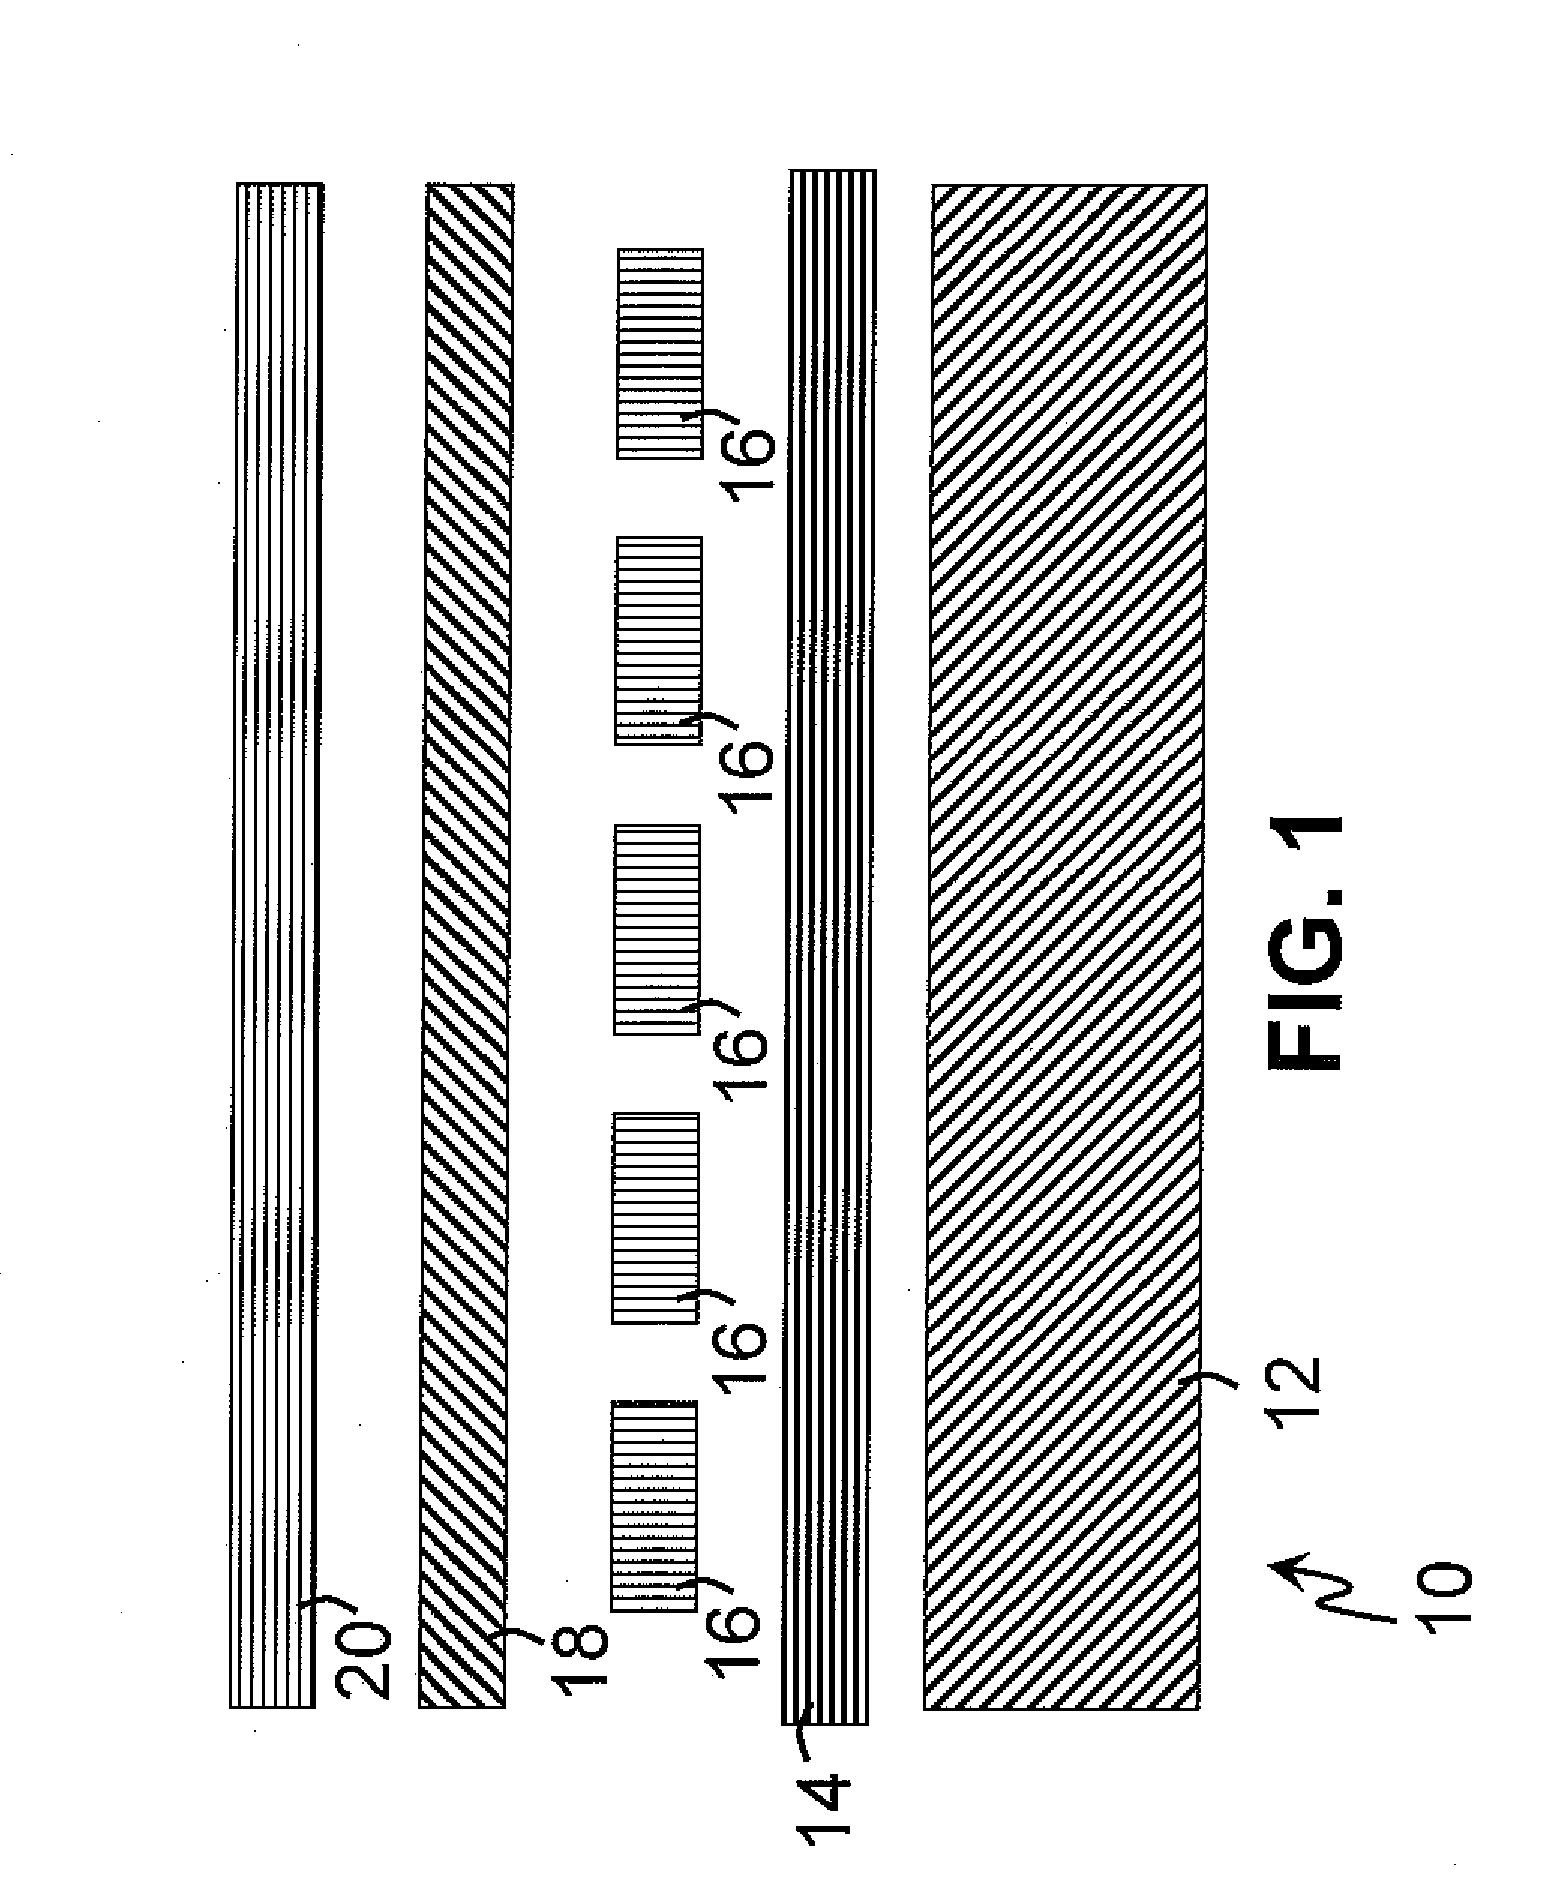 Thermal Conducting Materials for Solar Panel Components